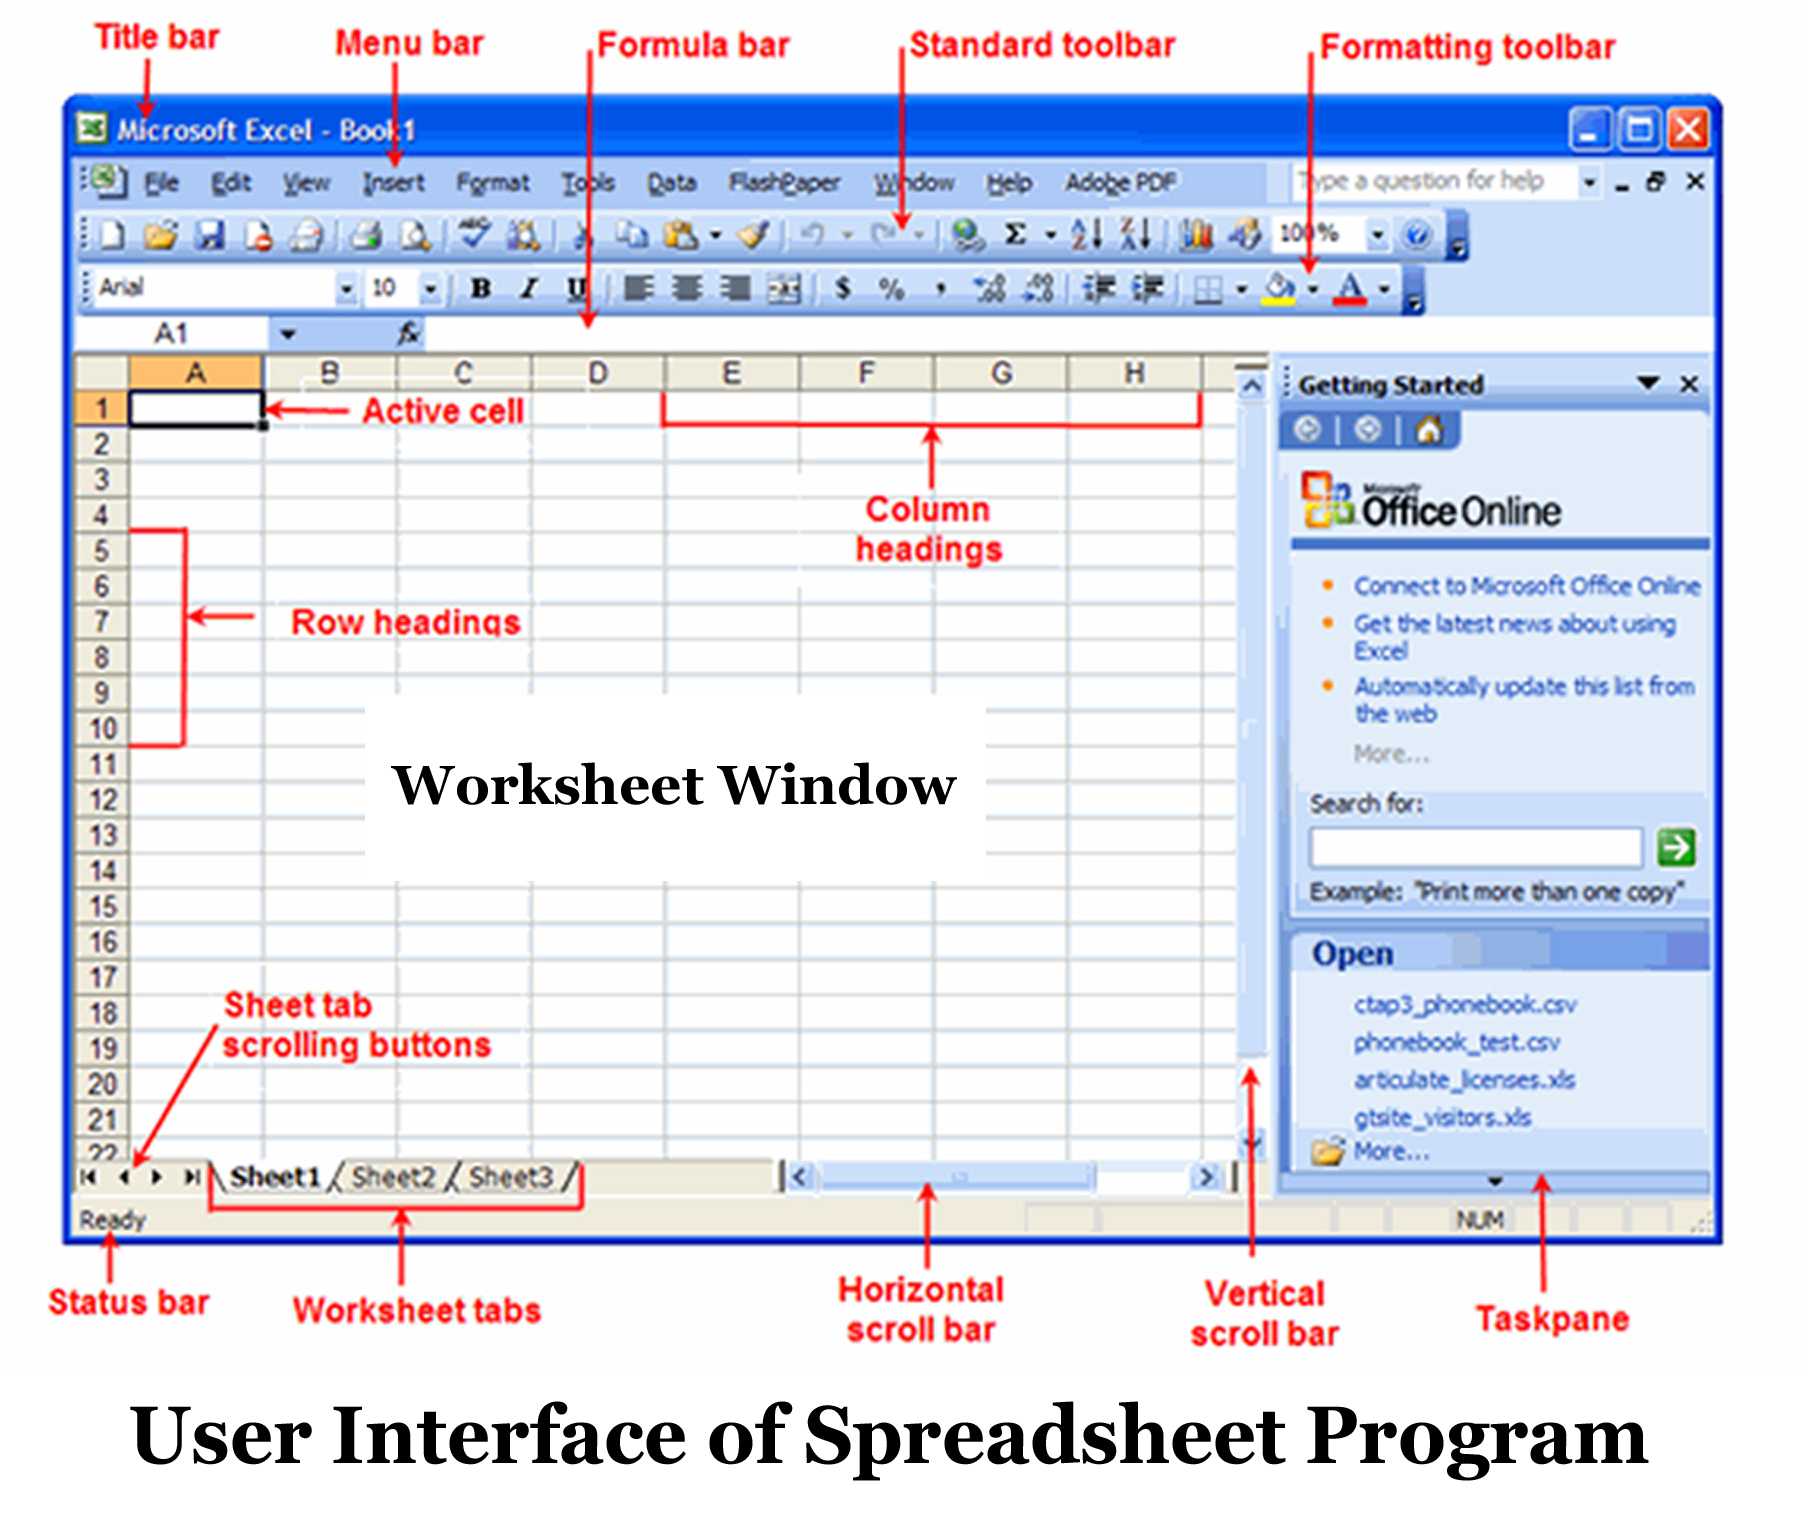 Microsoft Spreadsheet Program For Spreadsheet, Its Basic Features And User Interface